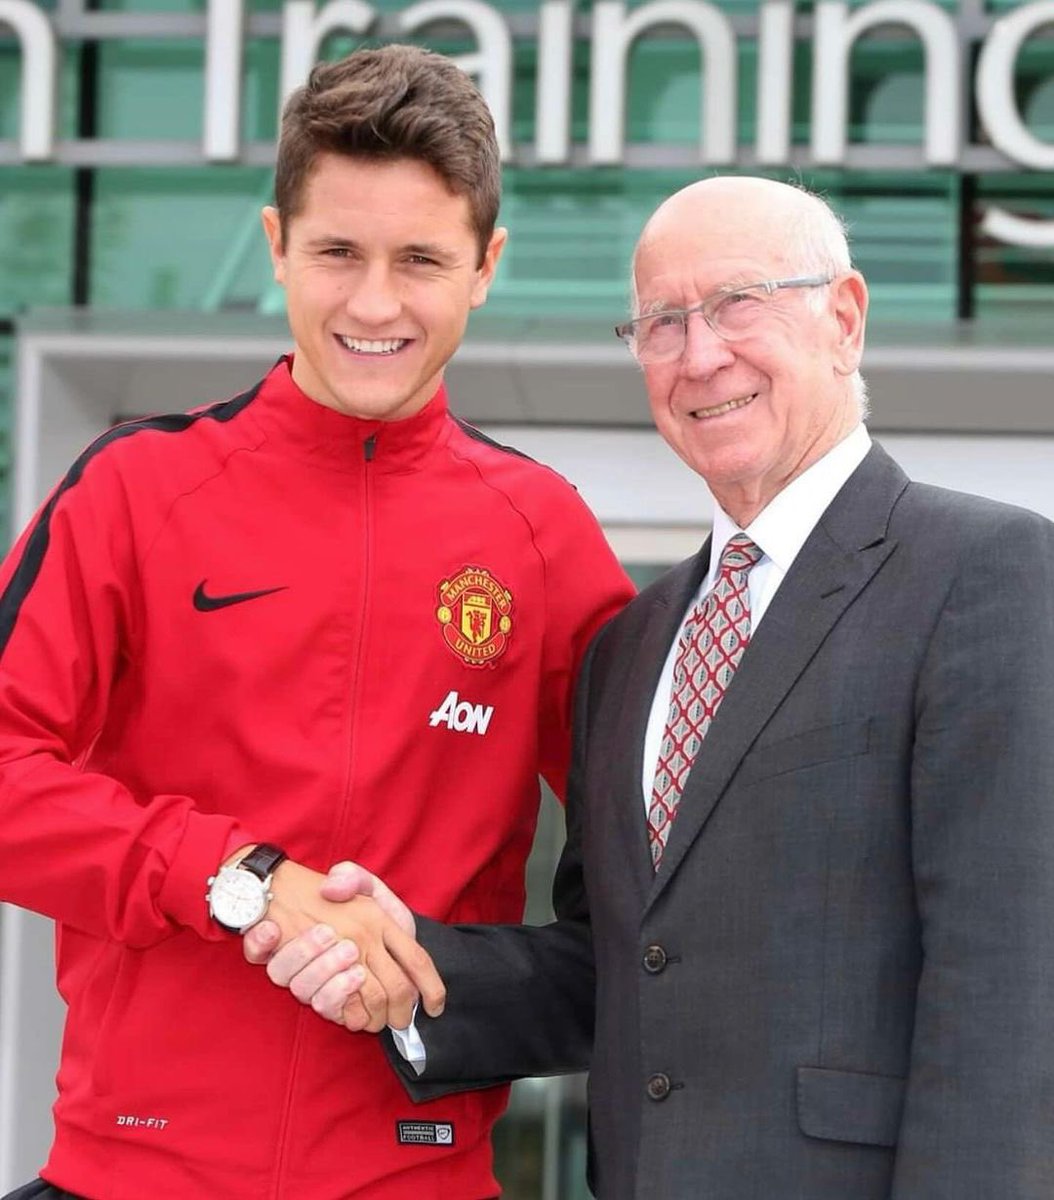 It was so special to see you the first day I arrived in Manchester, waiting for me to give me your warmest welcome. I will never forget it. You were everything at @ManUtd_Es Rest in peace sir Bobby Charlton